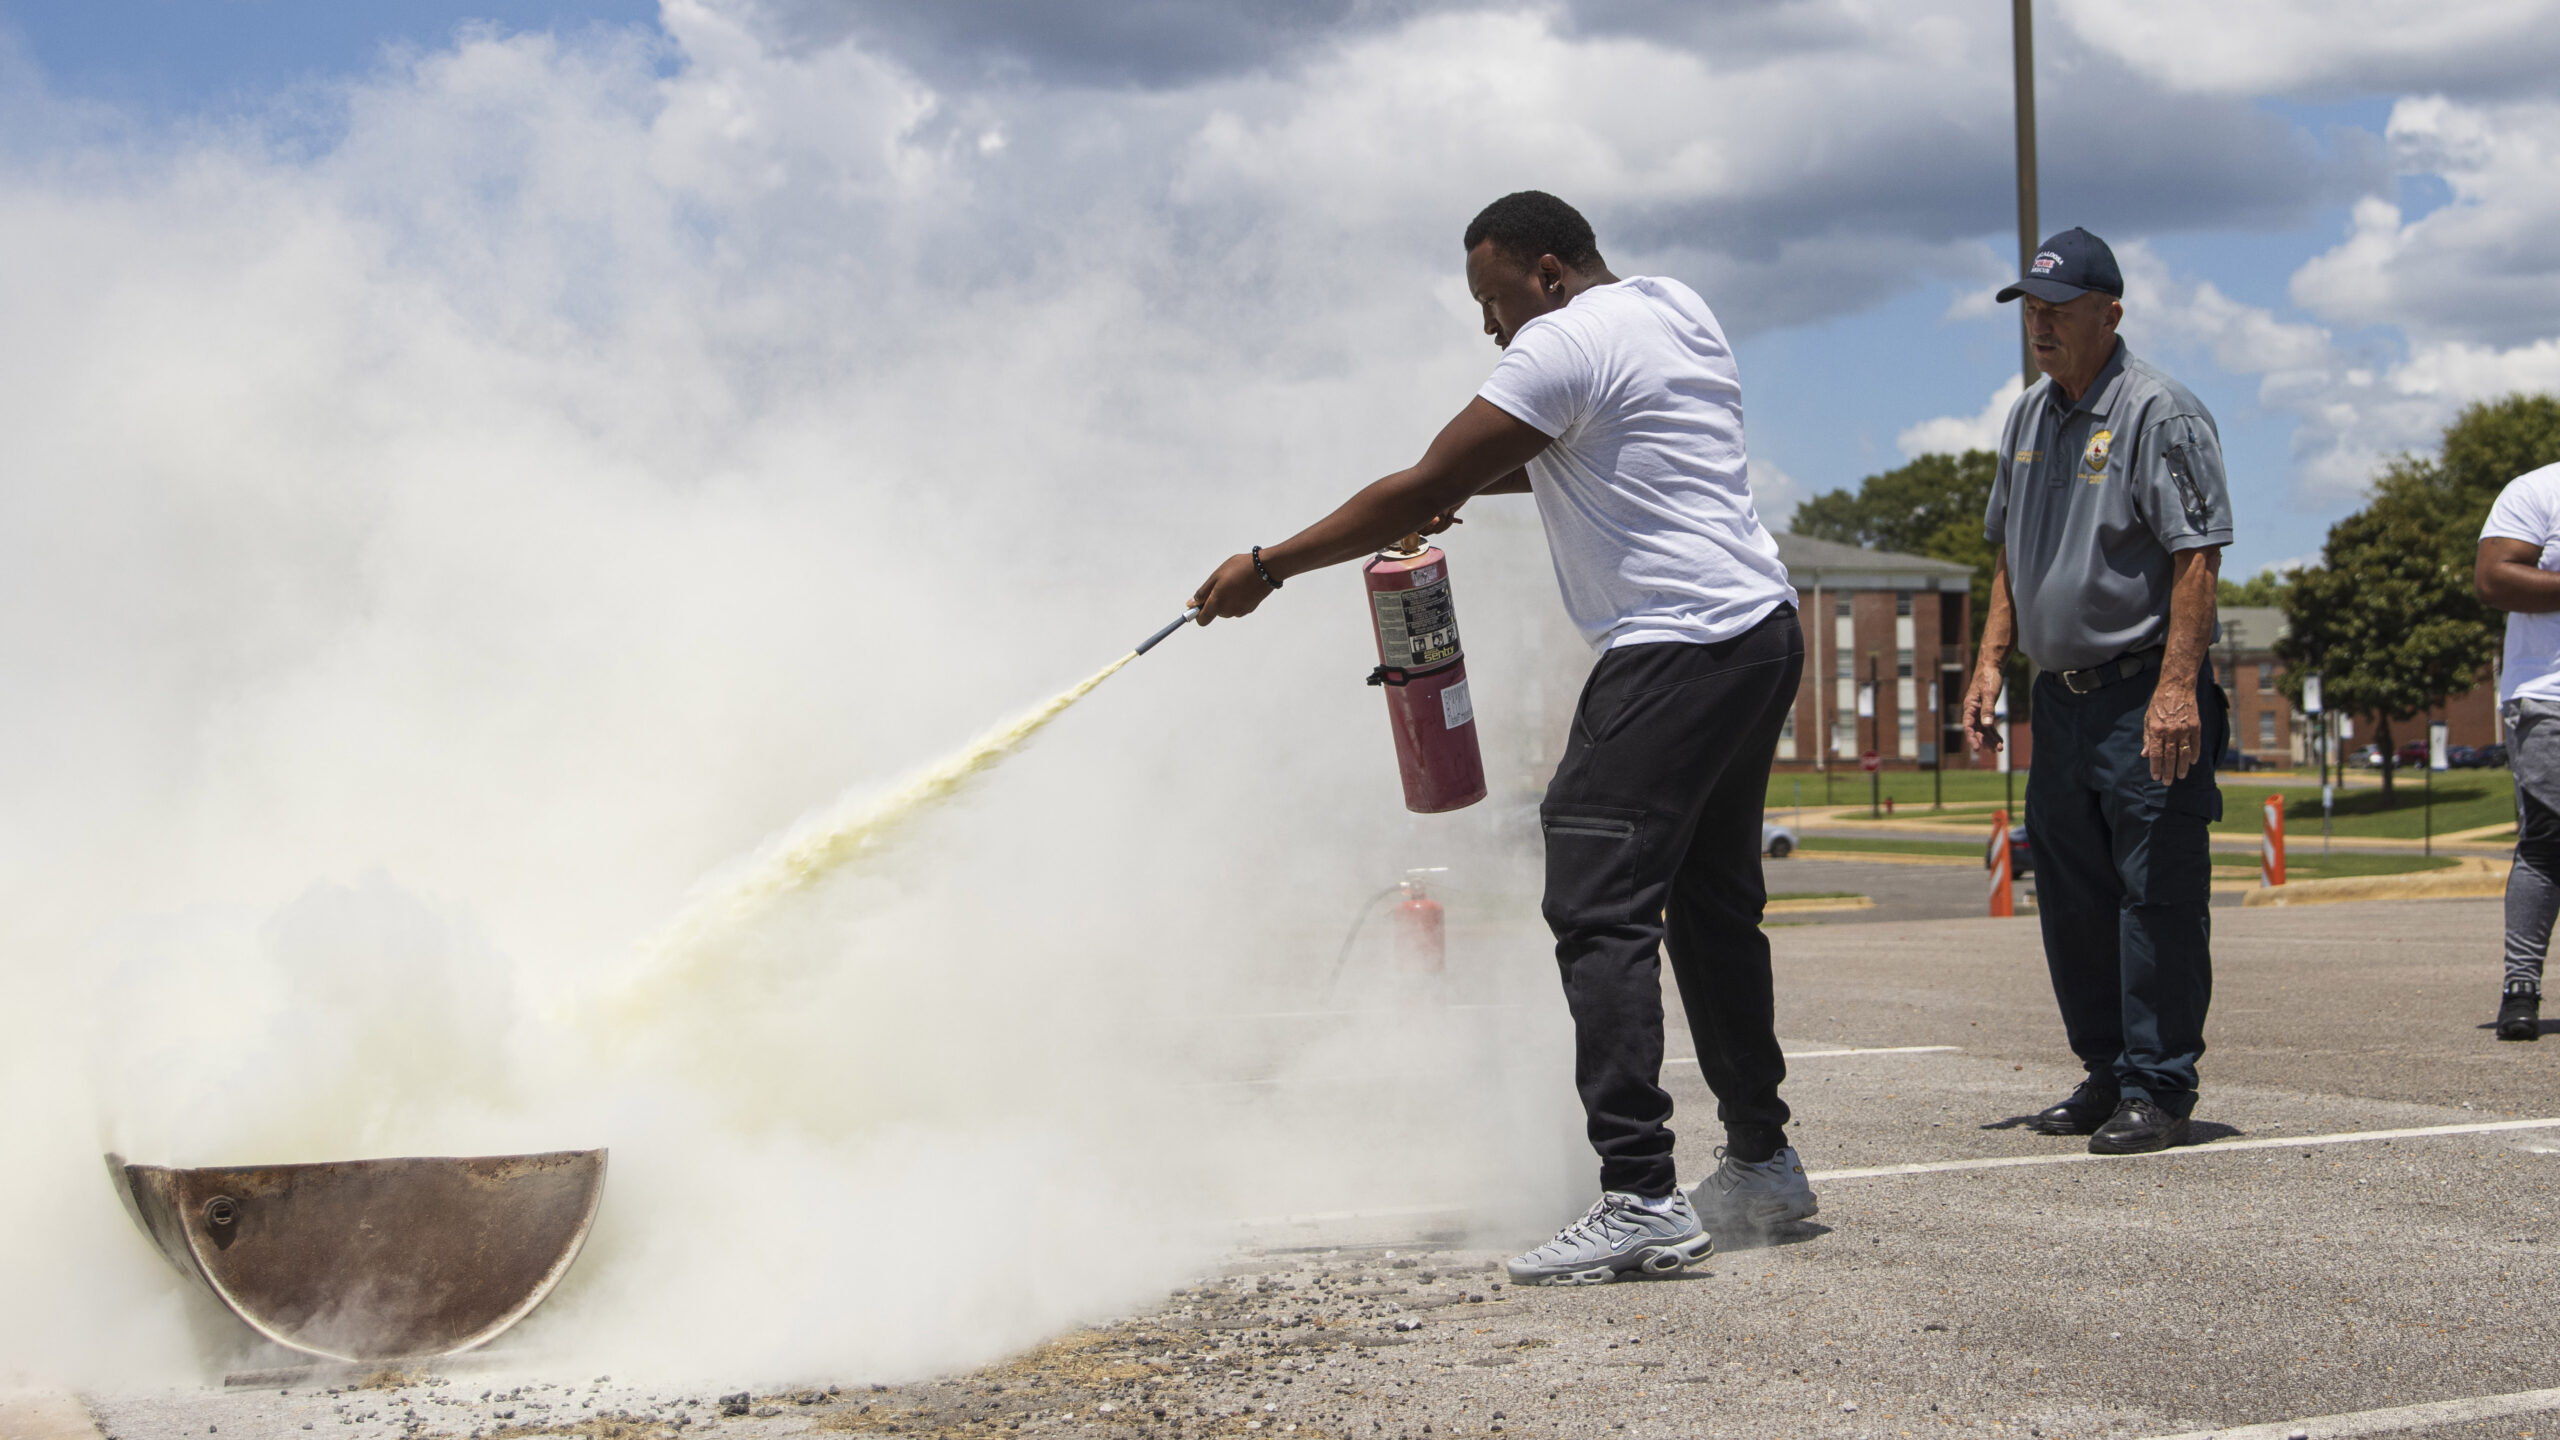 A black college student extinguishes a small fire during a training session